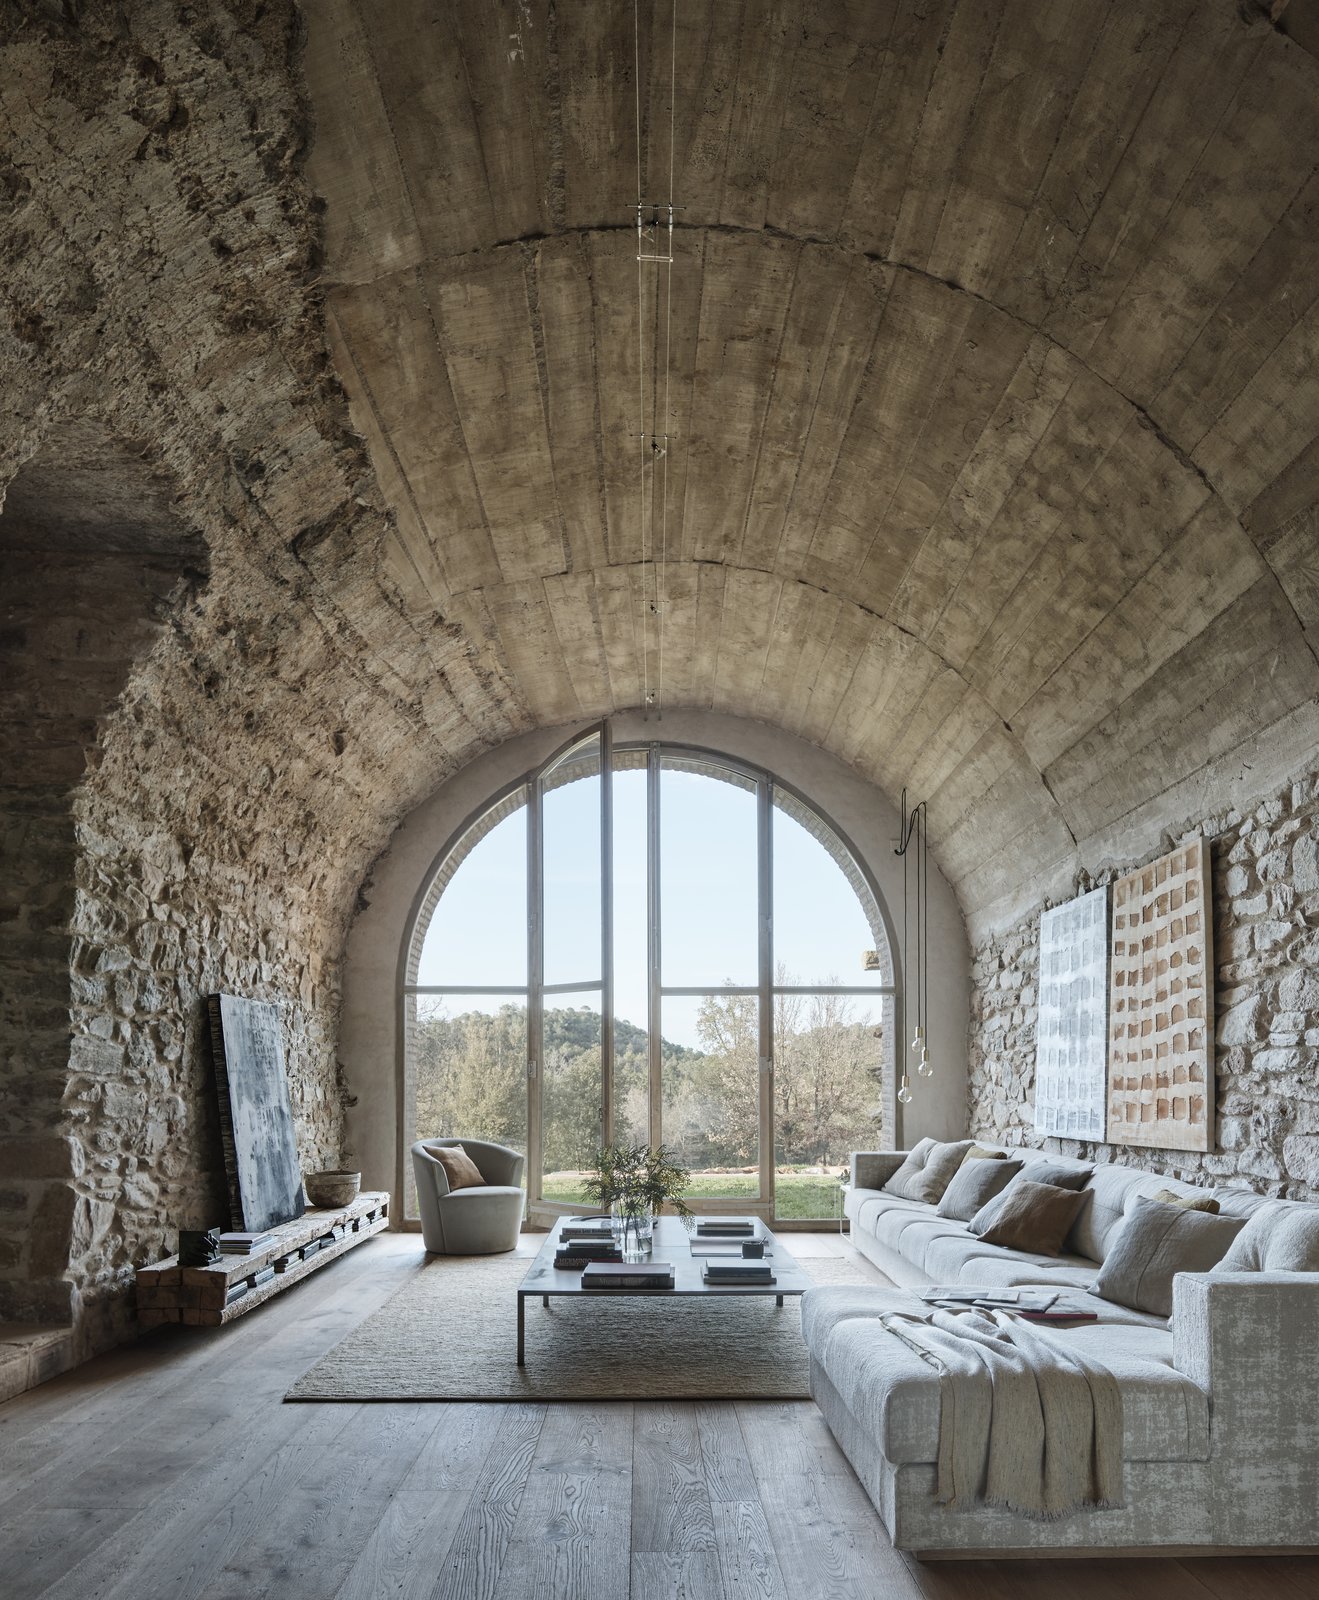 Joan Lao, Adalina Coromines, and Africa Lao Turn an Old Spanish Farmhouse Into an Incredible Home